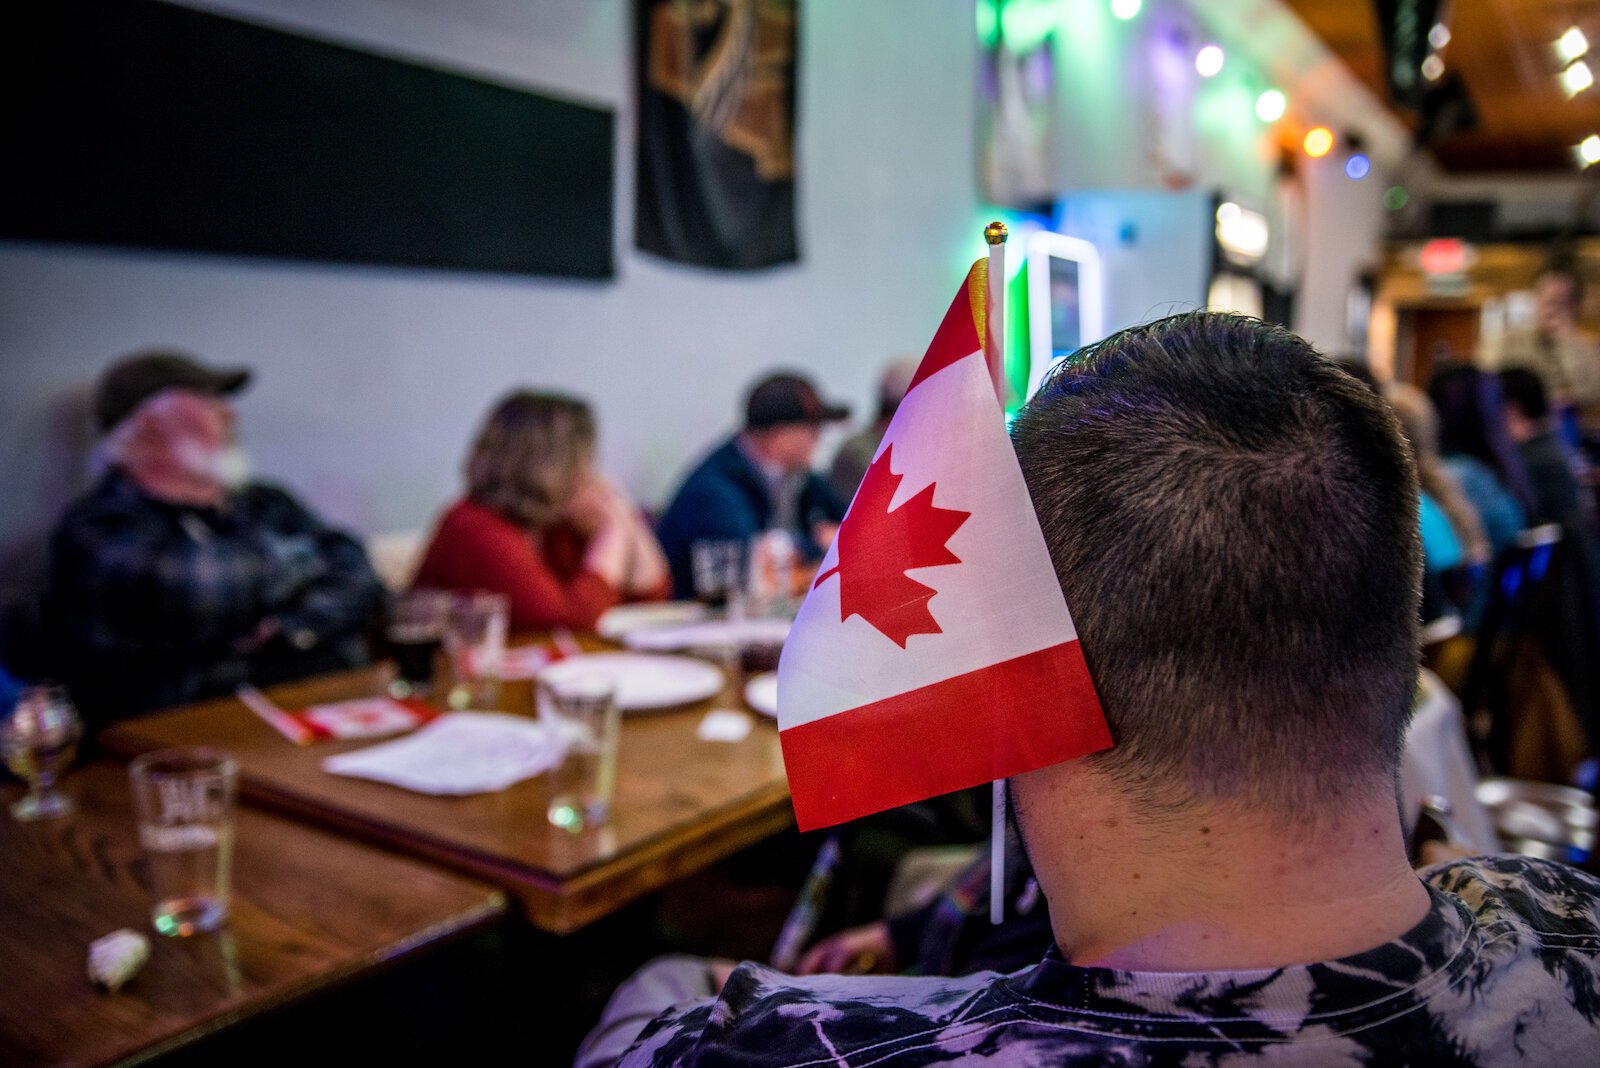 Canadian music, food, culture, and history were all topics at the first Canuck Club meeting.